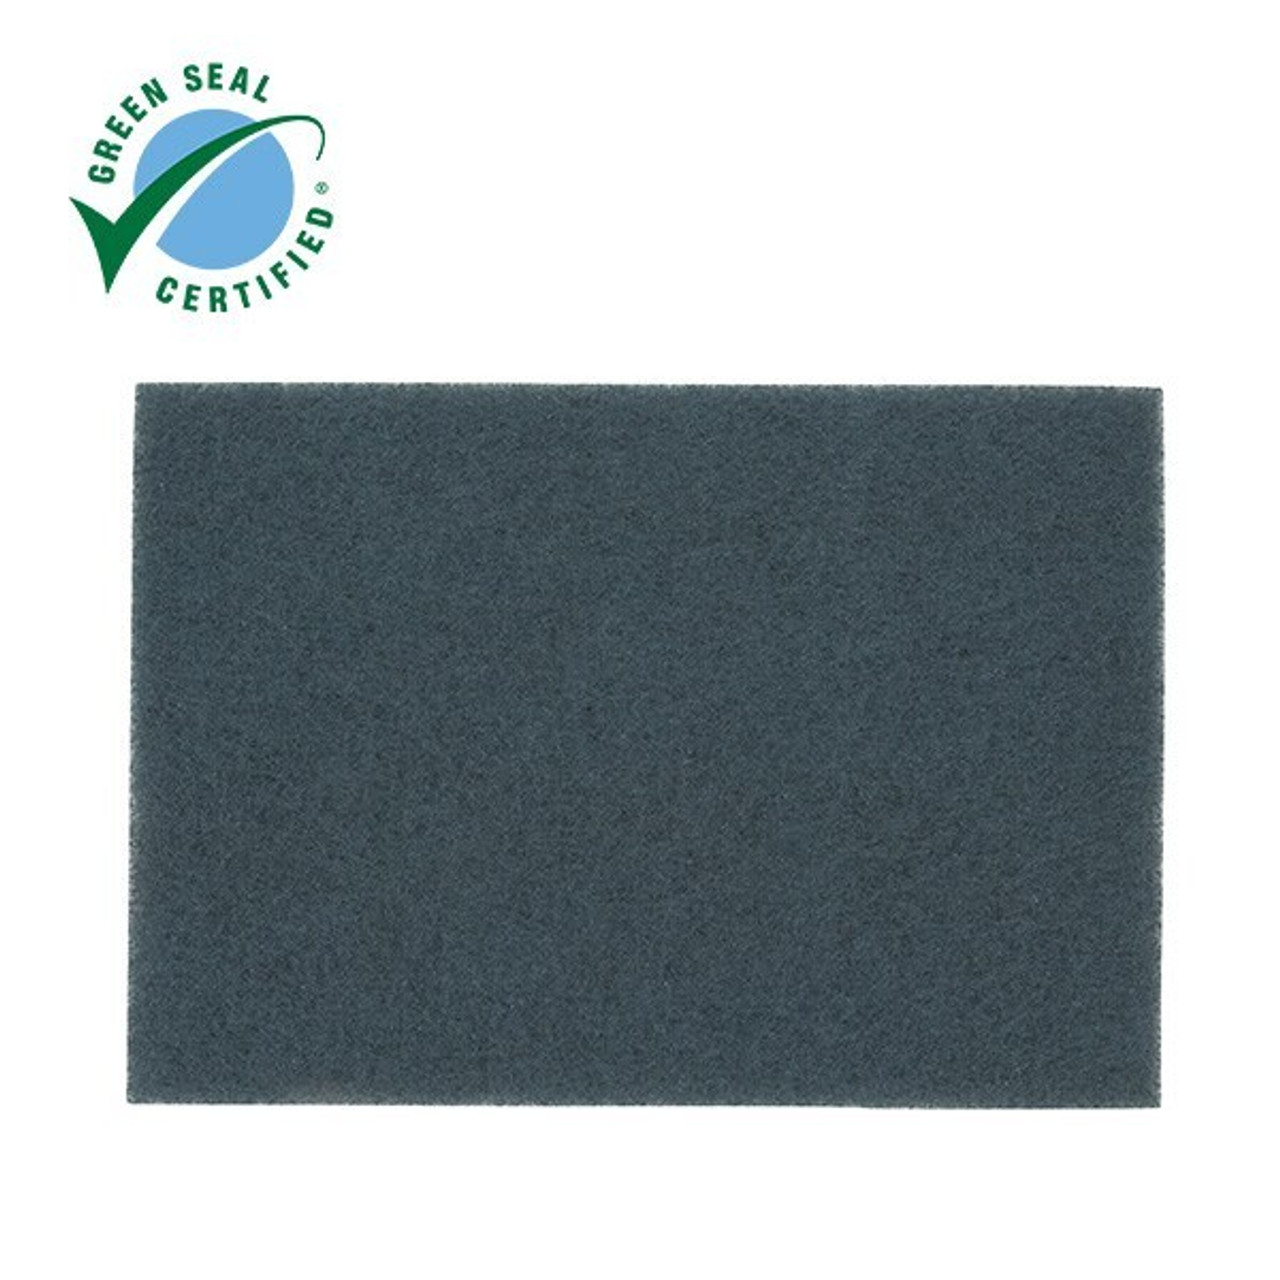 BLUE CLEANER SCRUB FLOOR PAD (5 PADS PER BOX) – Cleaning Depot Supply